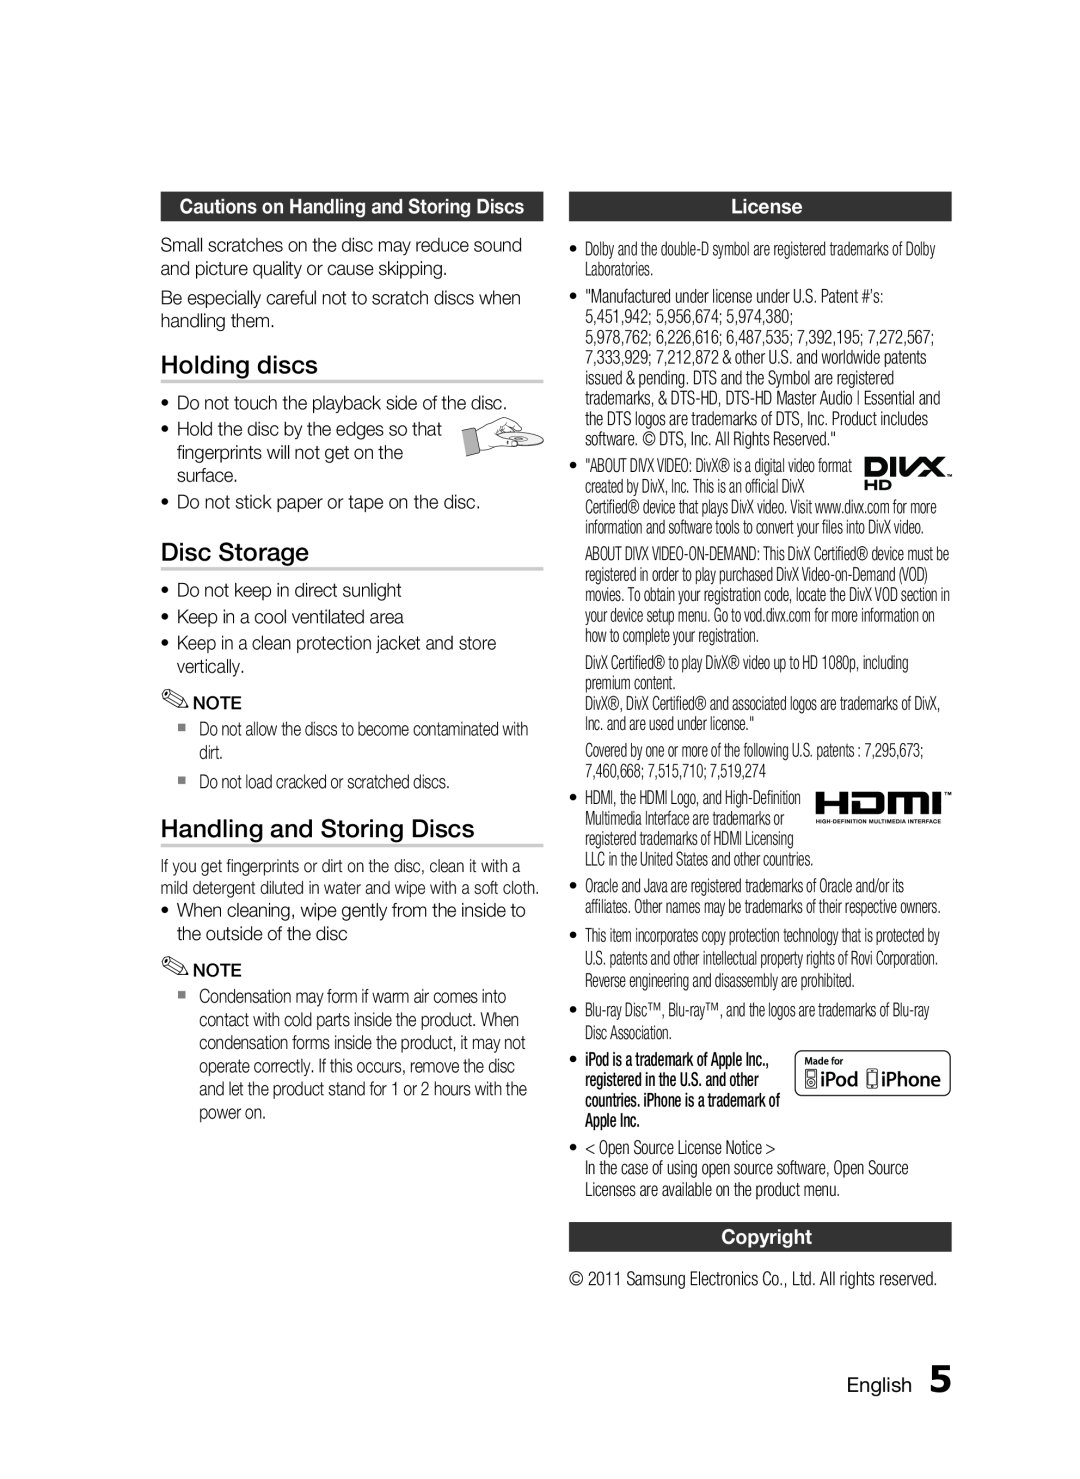 Samsung HW-D7000 user manual Holding discs, Disc Storage, Cautions on Handling and Storing Discs, License, Copyright 